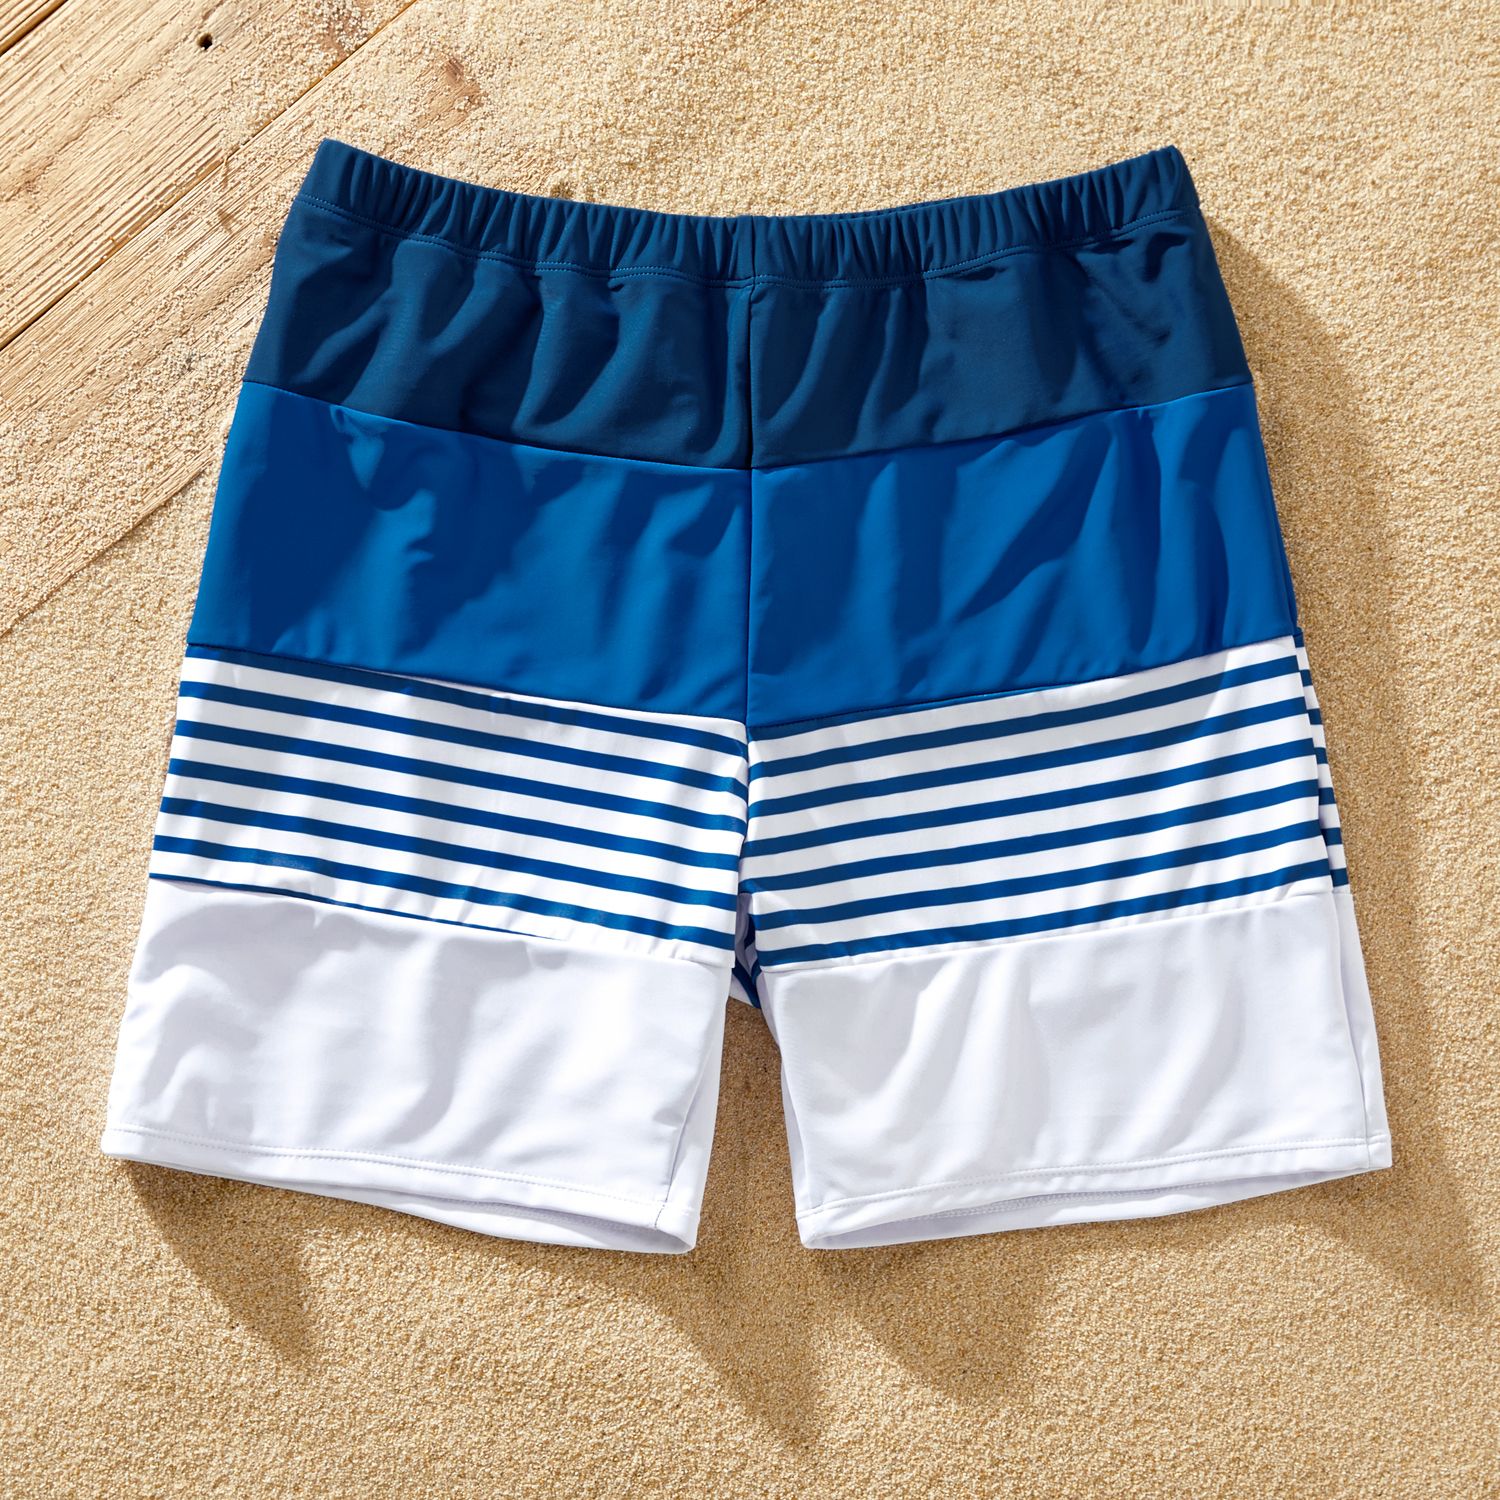 Family Matching Blue Striped Ruffled One Shoulder Cut Out One-piece Swimsuit Or Swim Trunks Shorts